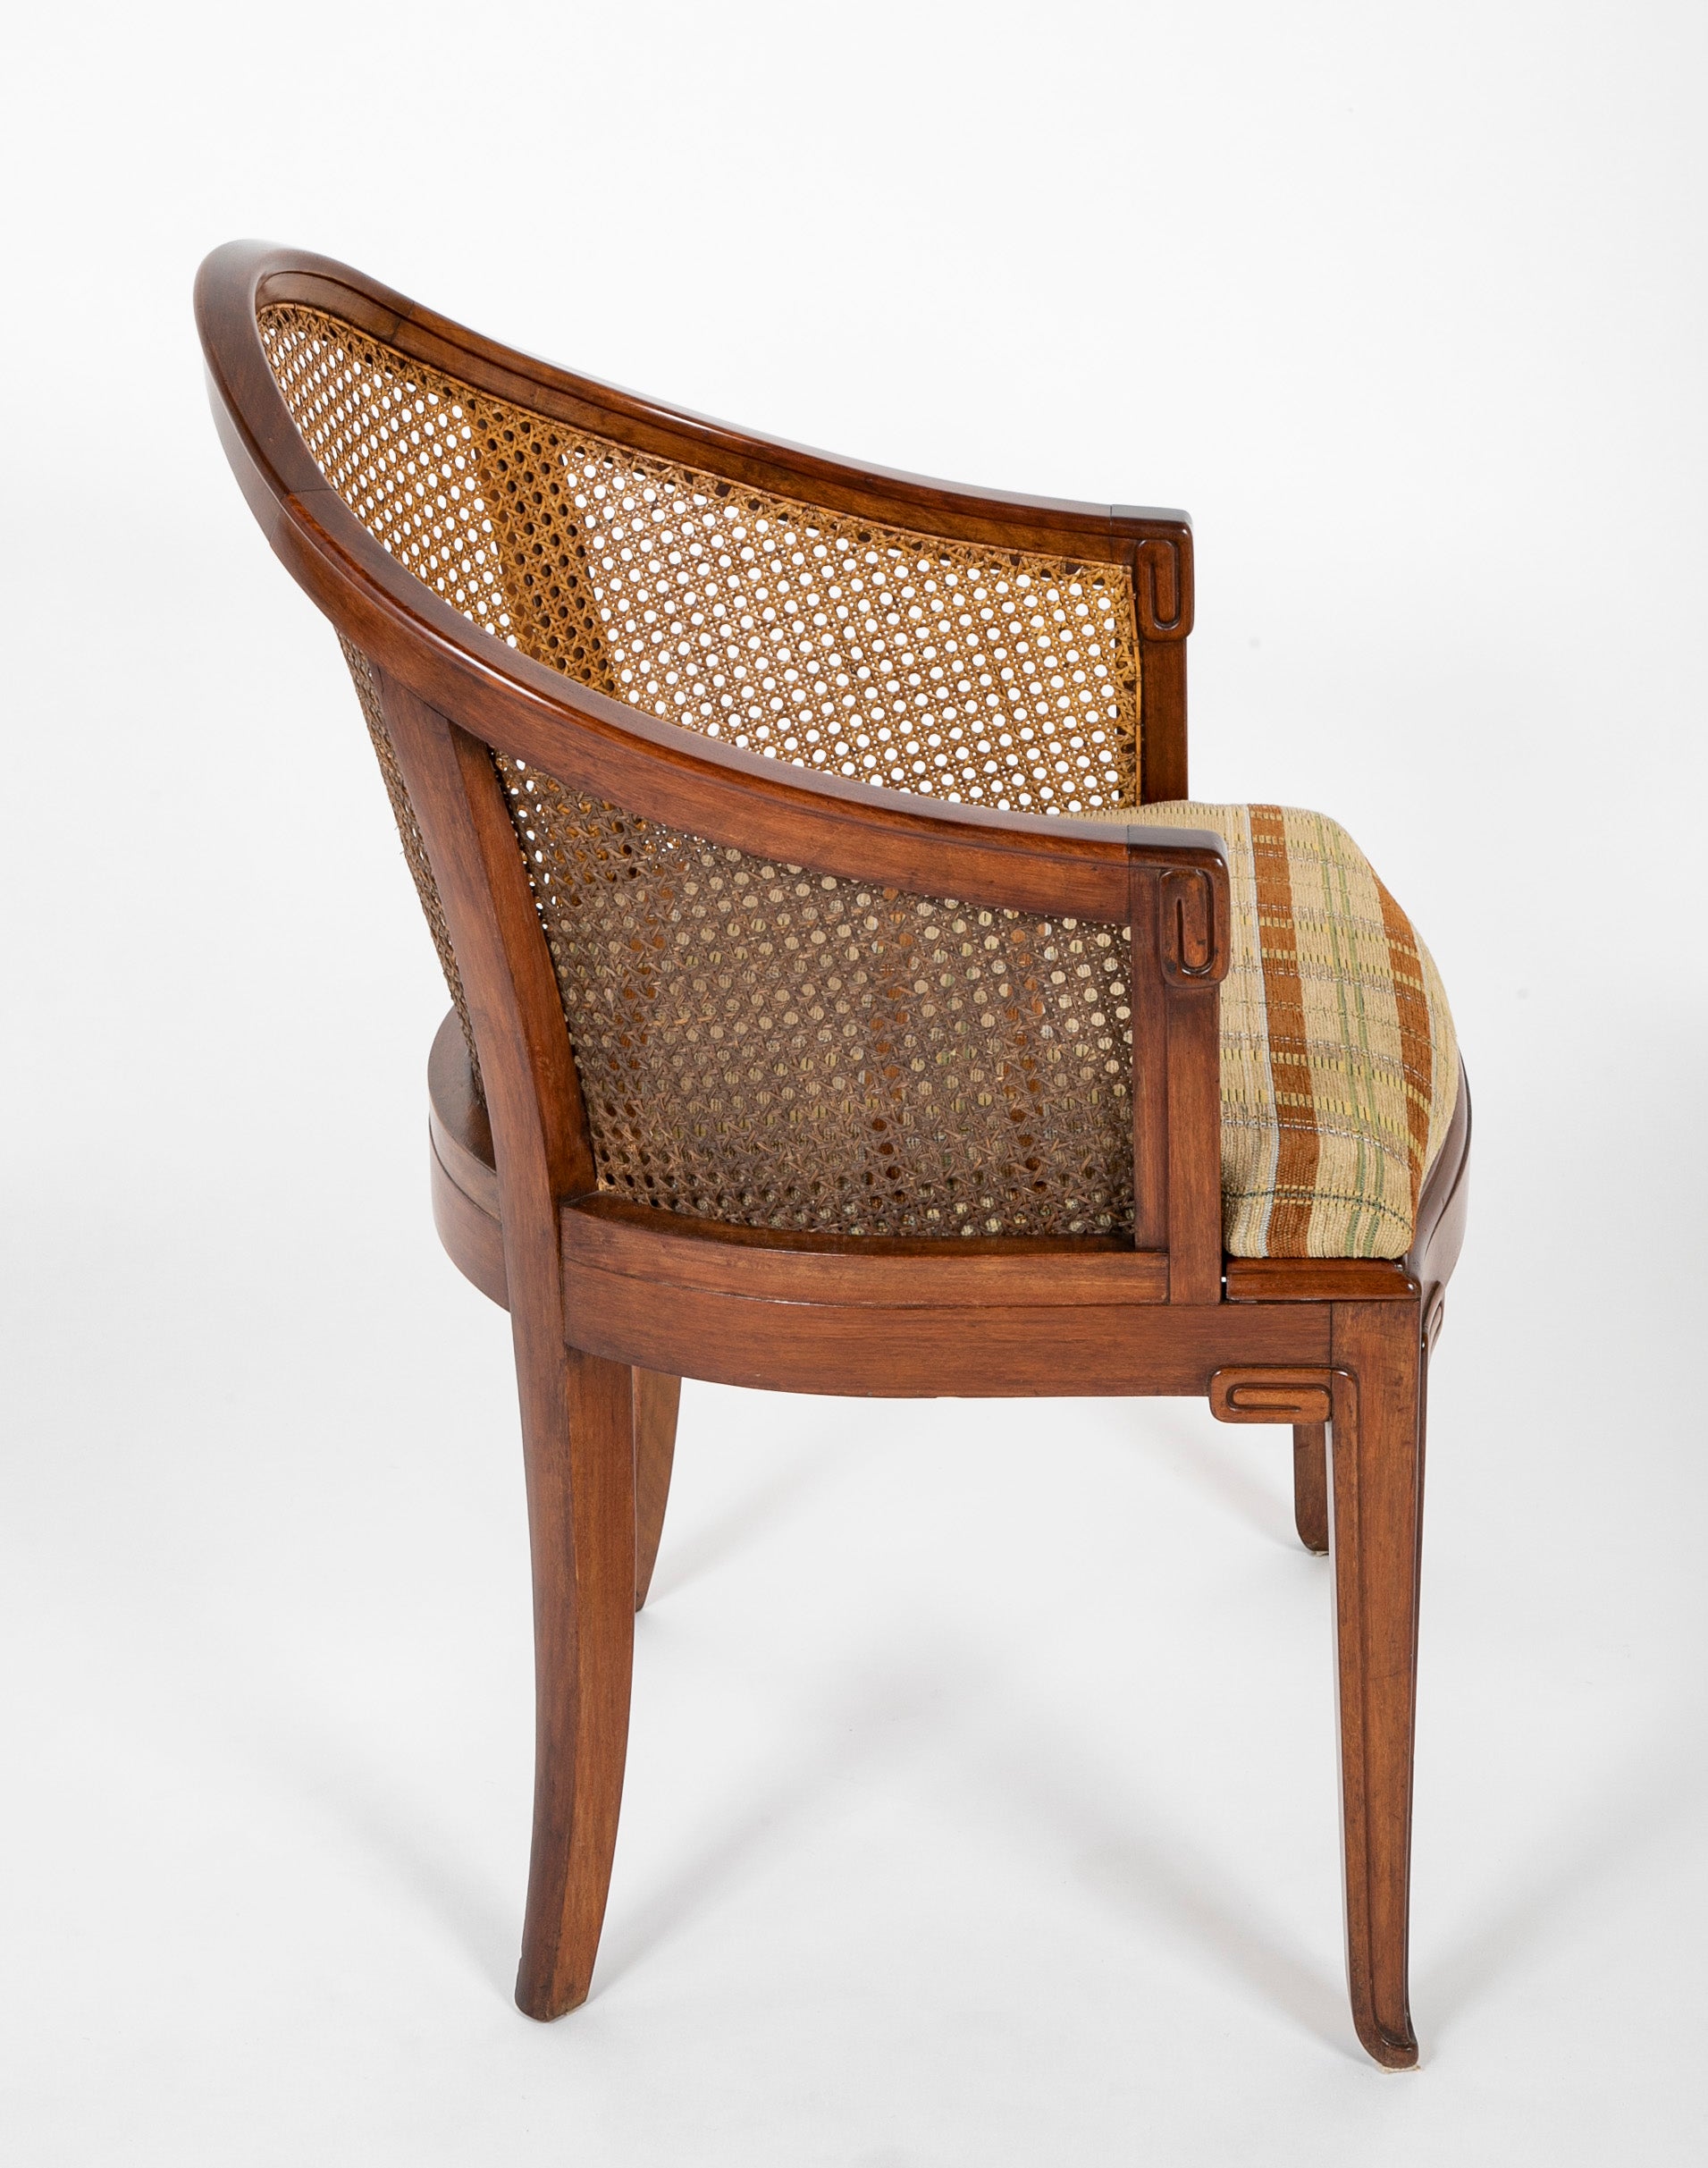 Set of Four Slip Seated Caned Back Armchairs Attributed to Maurice Dufrene